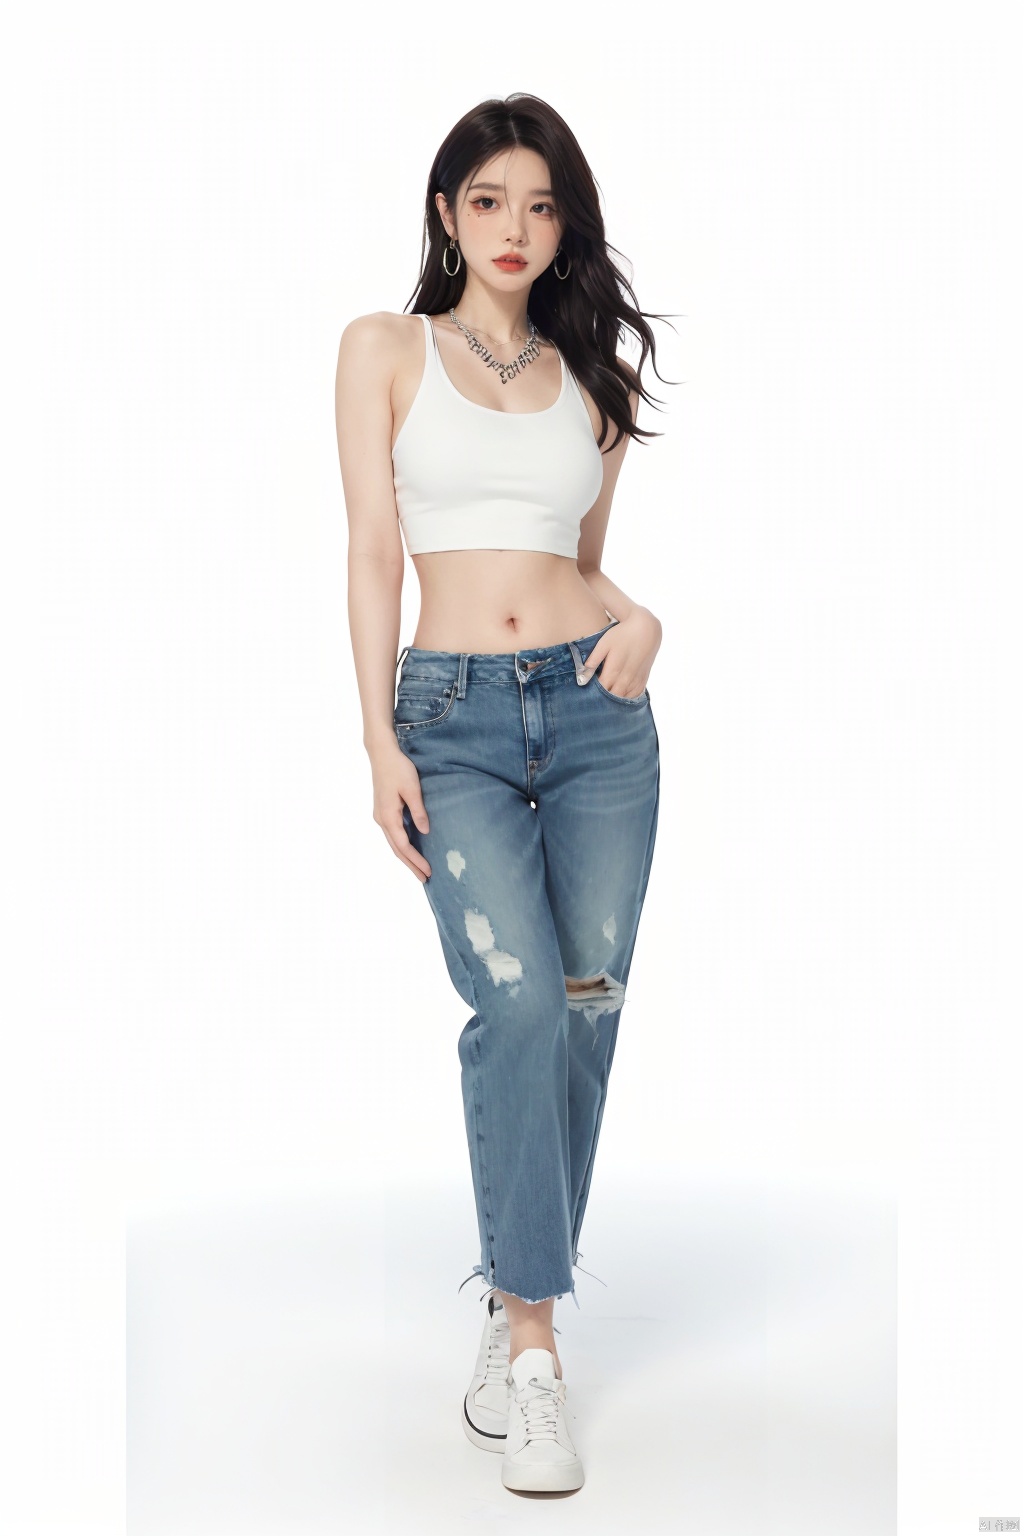  (best quality), ((masterpiece)), (highres), digital art, illustration, original, ultra-realistic, intricate details . ooo, 1girl, solo, flowing black hair, voluminous locks, full body, minimalist white background, piercing blue eyes, direct gaze, looking at viewer, visible navel, casual outfit, high-waisted green pants, cropped jeans, sneakers, iconic nike shoes in black and white, exposed ankles, jewelry adorned, silver hoop earrings, statement necklace, stylish crop top, off-shoulder cut, midriff-baring, fitted black leather jacket, hands tucked casually in pockets, bare shoulders, toned arms, subtle smile, standing pose, natural cleavage, slightly parted lips, **** top underneath, medium-sized breasts, prominent collarbone, unzipped open jacket revealing a hint of the **** top, floating strands of hair, dynamic composition, confident stance., ((poakl))